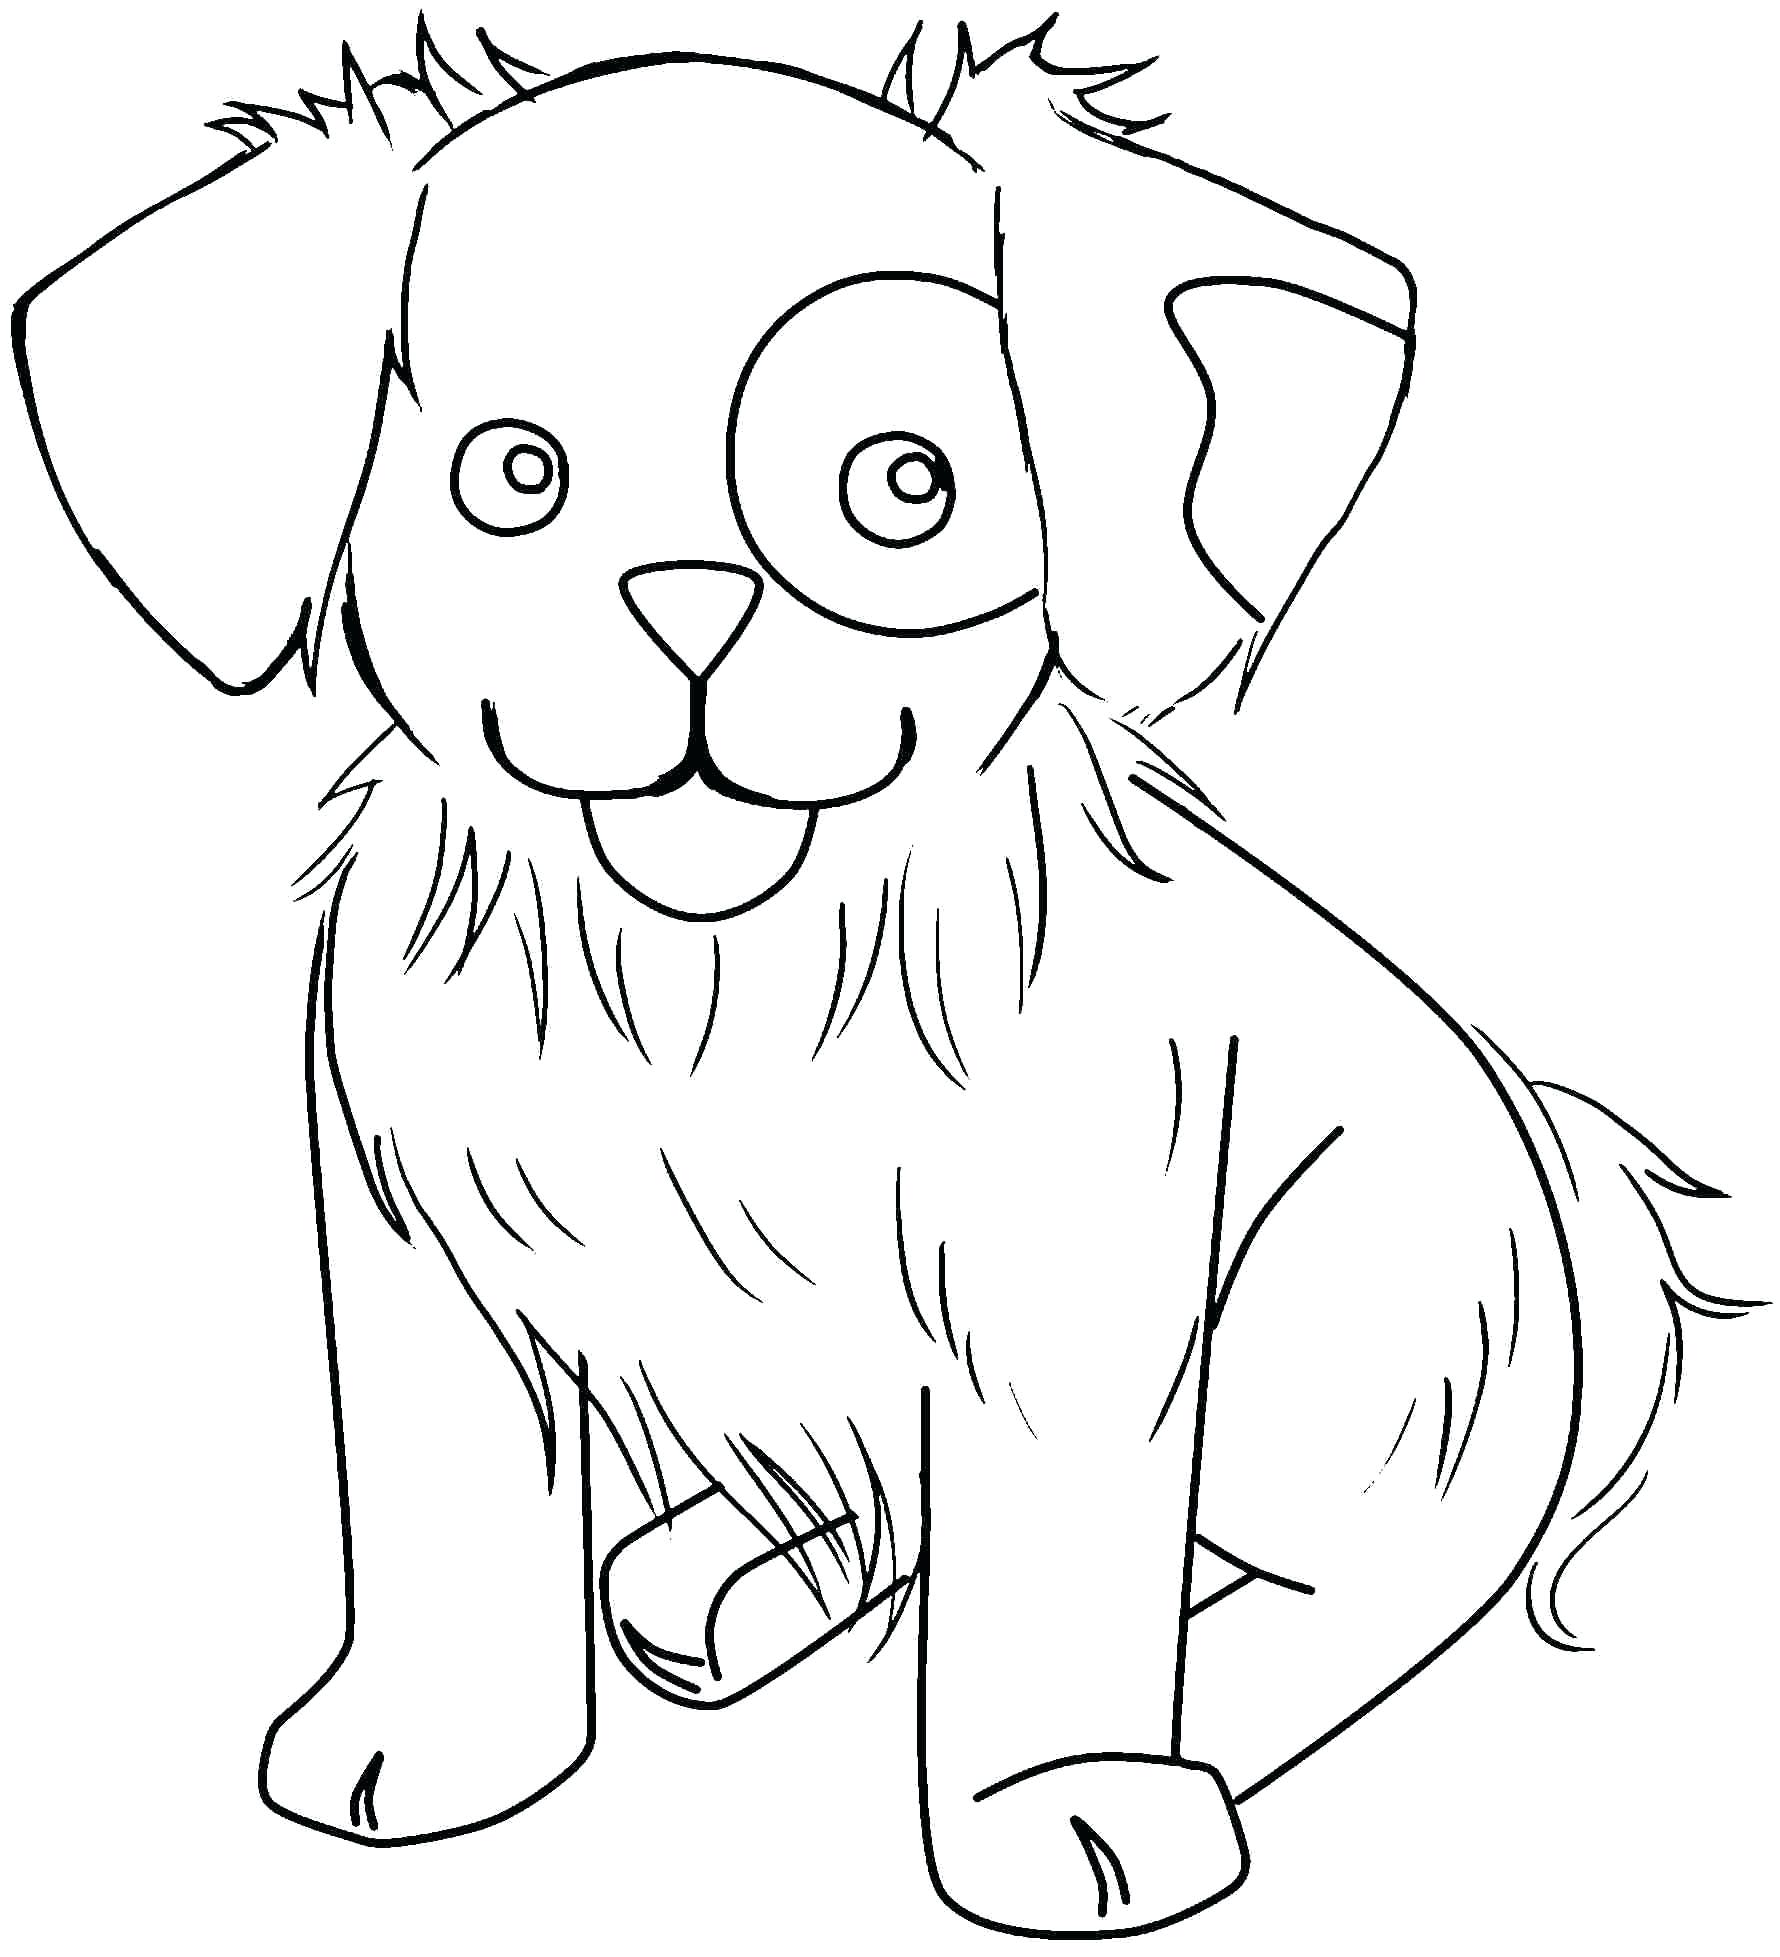 A cute dog Coloring Pages   Cute Animal Coloring Pages   Coloring ...